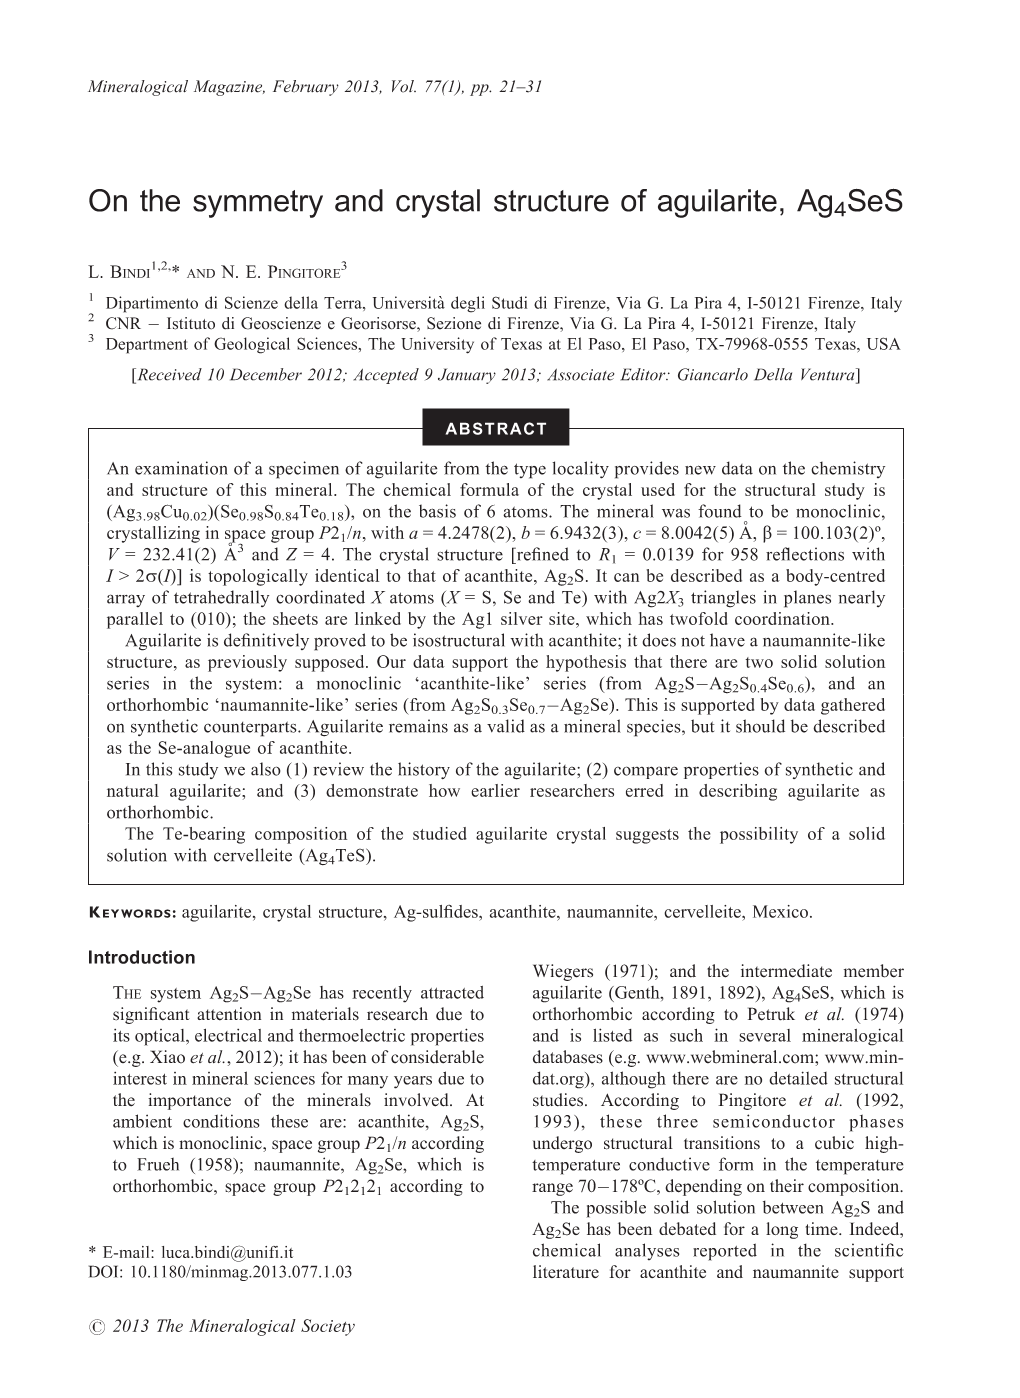 On the Symmetry and Crystal Structure of Aguilarite, Ag4ses